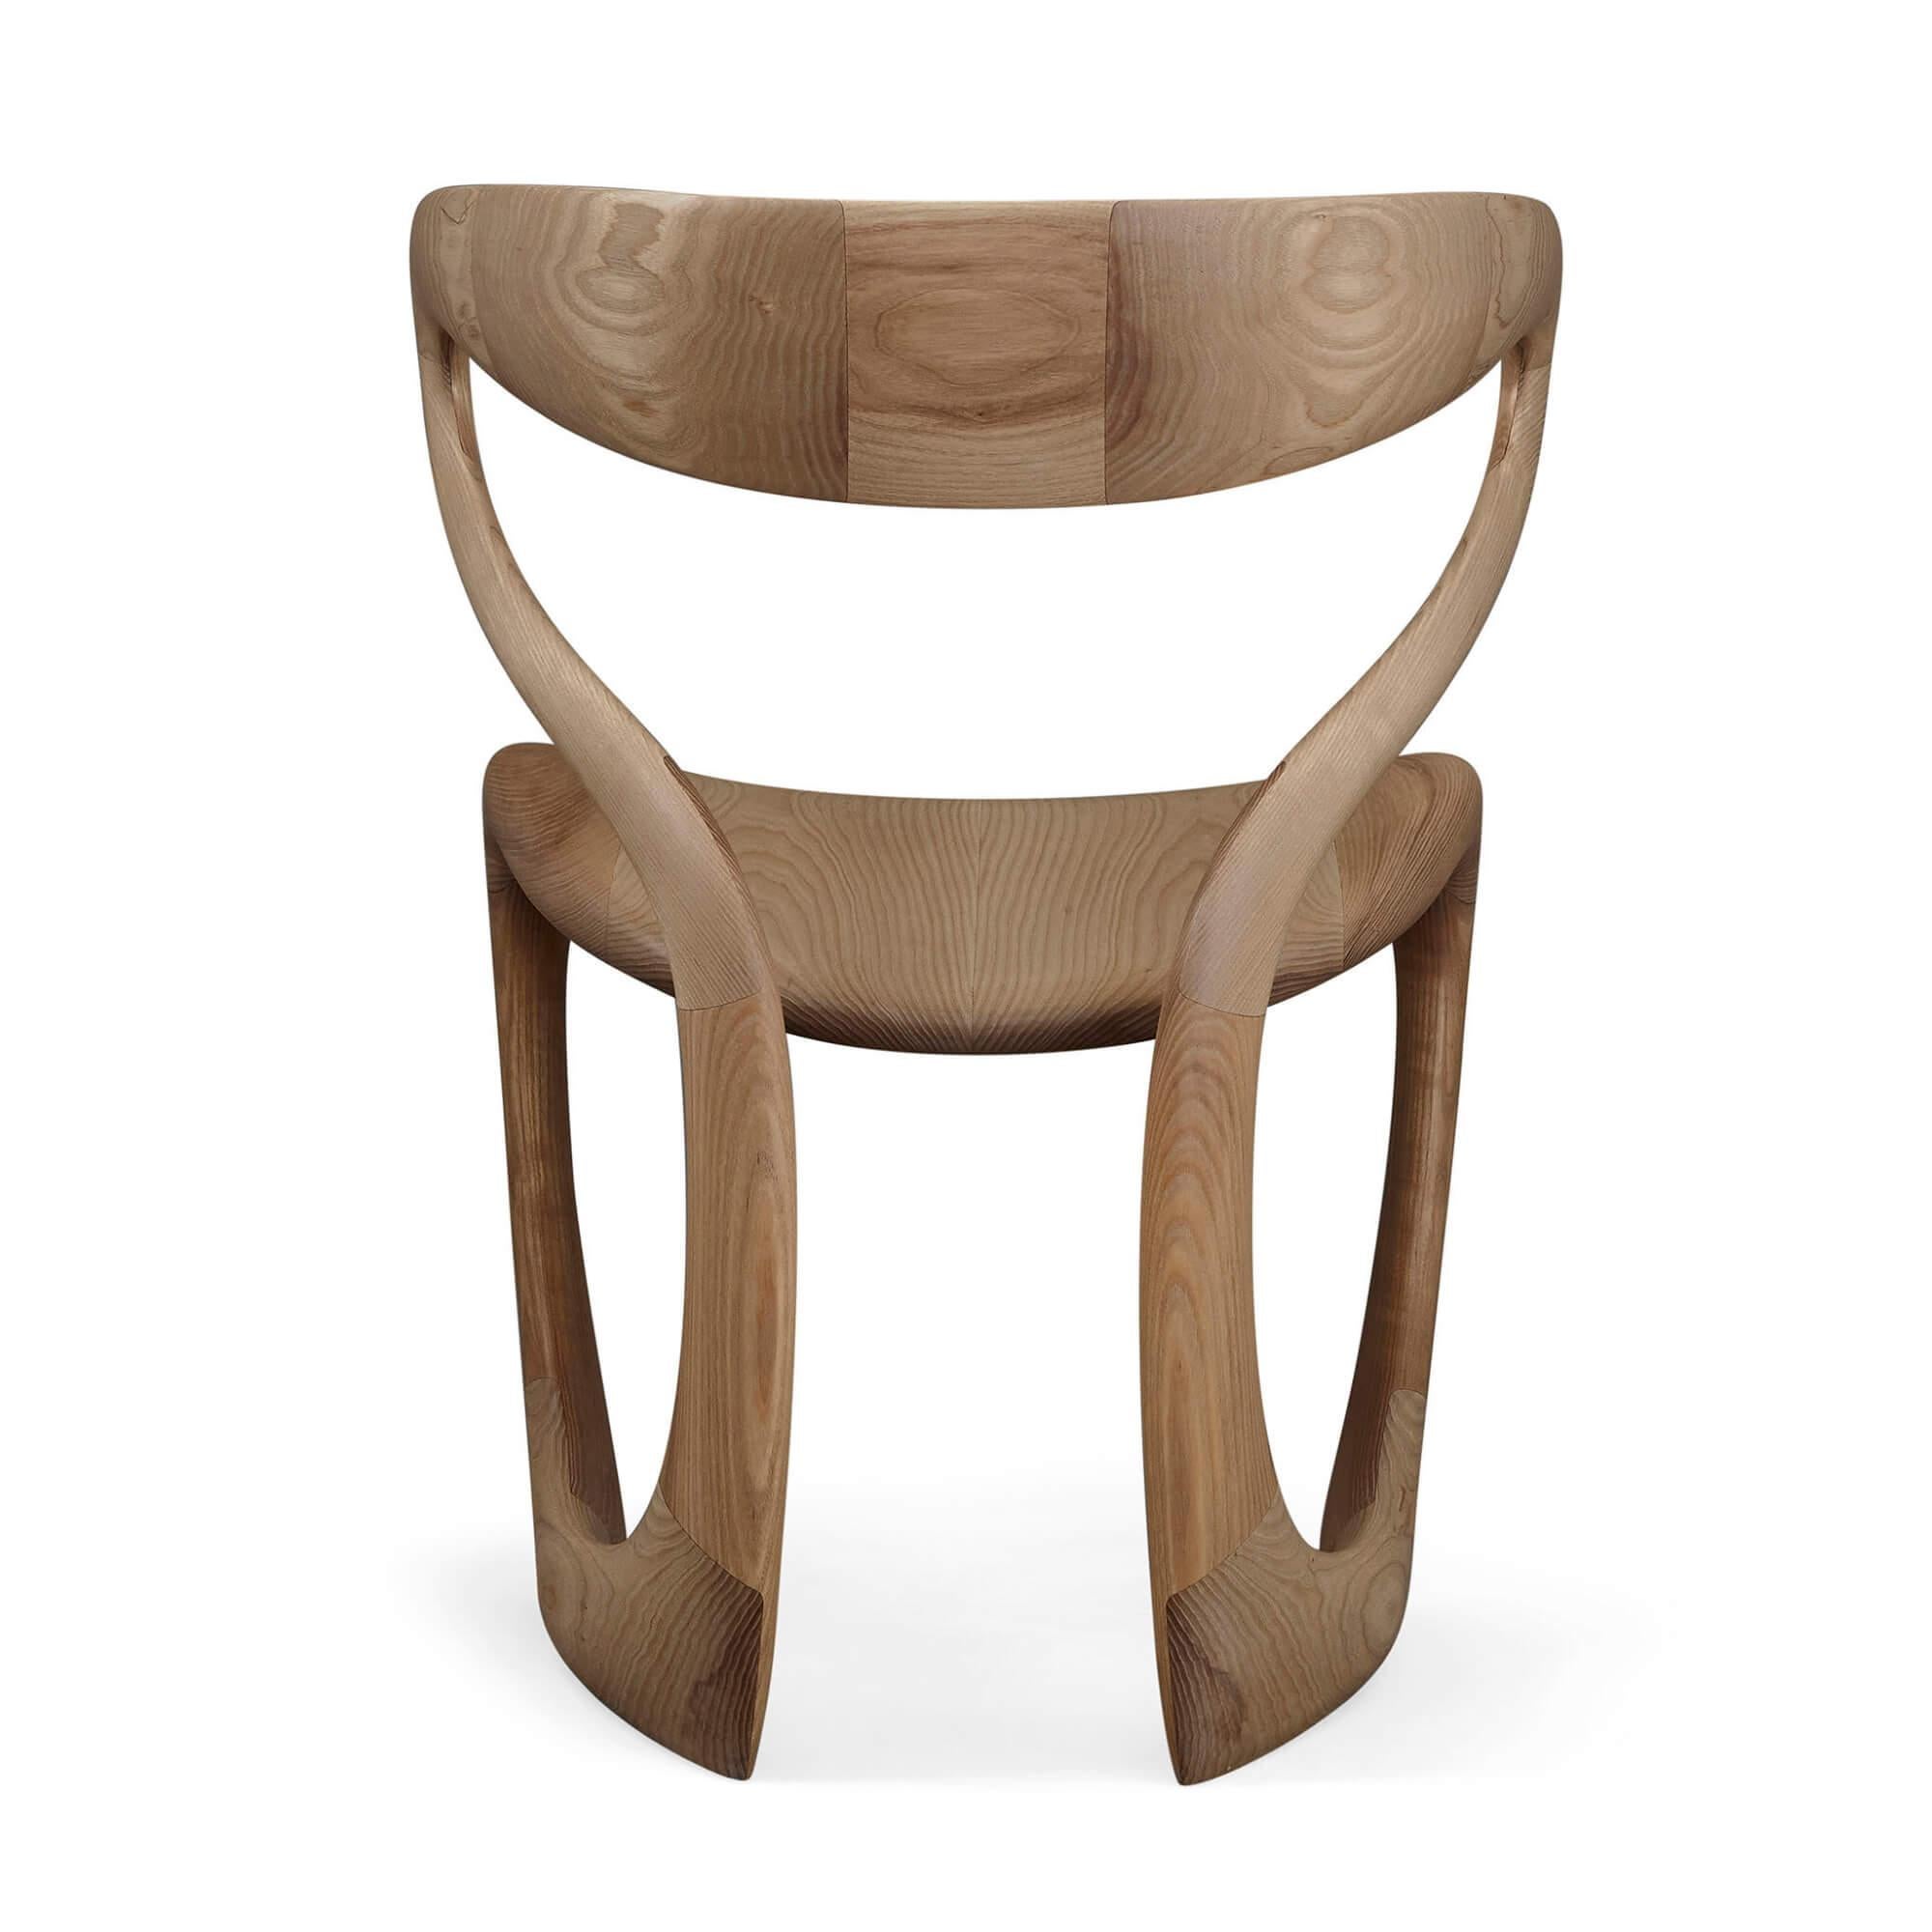 Ash 'S Chair', Contemporary Abstract Wooden Chair by Tom Vaughan